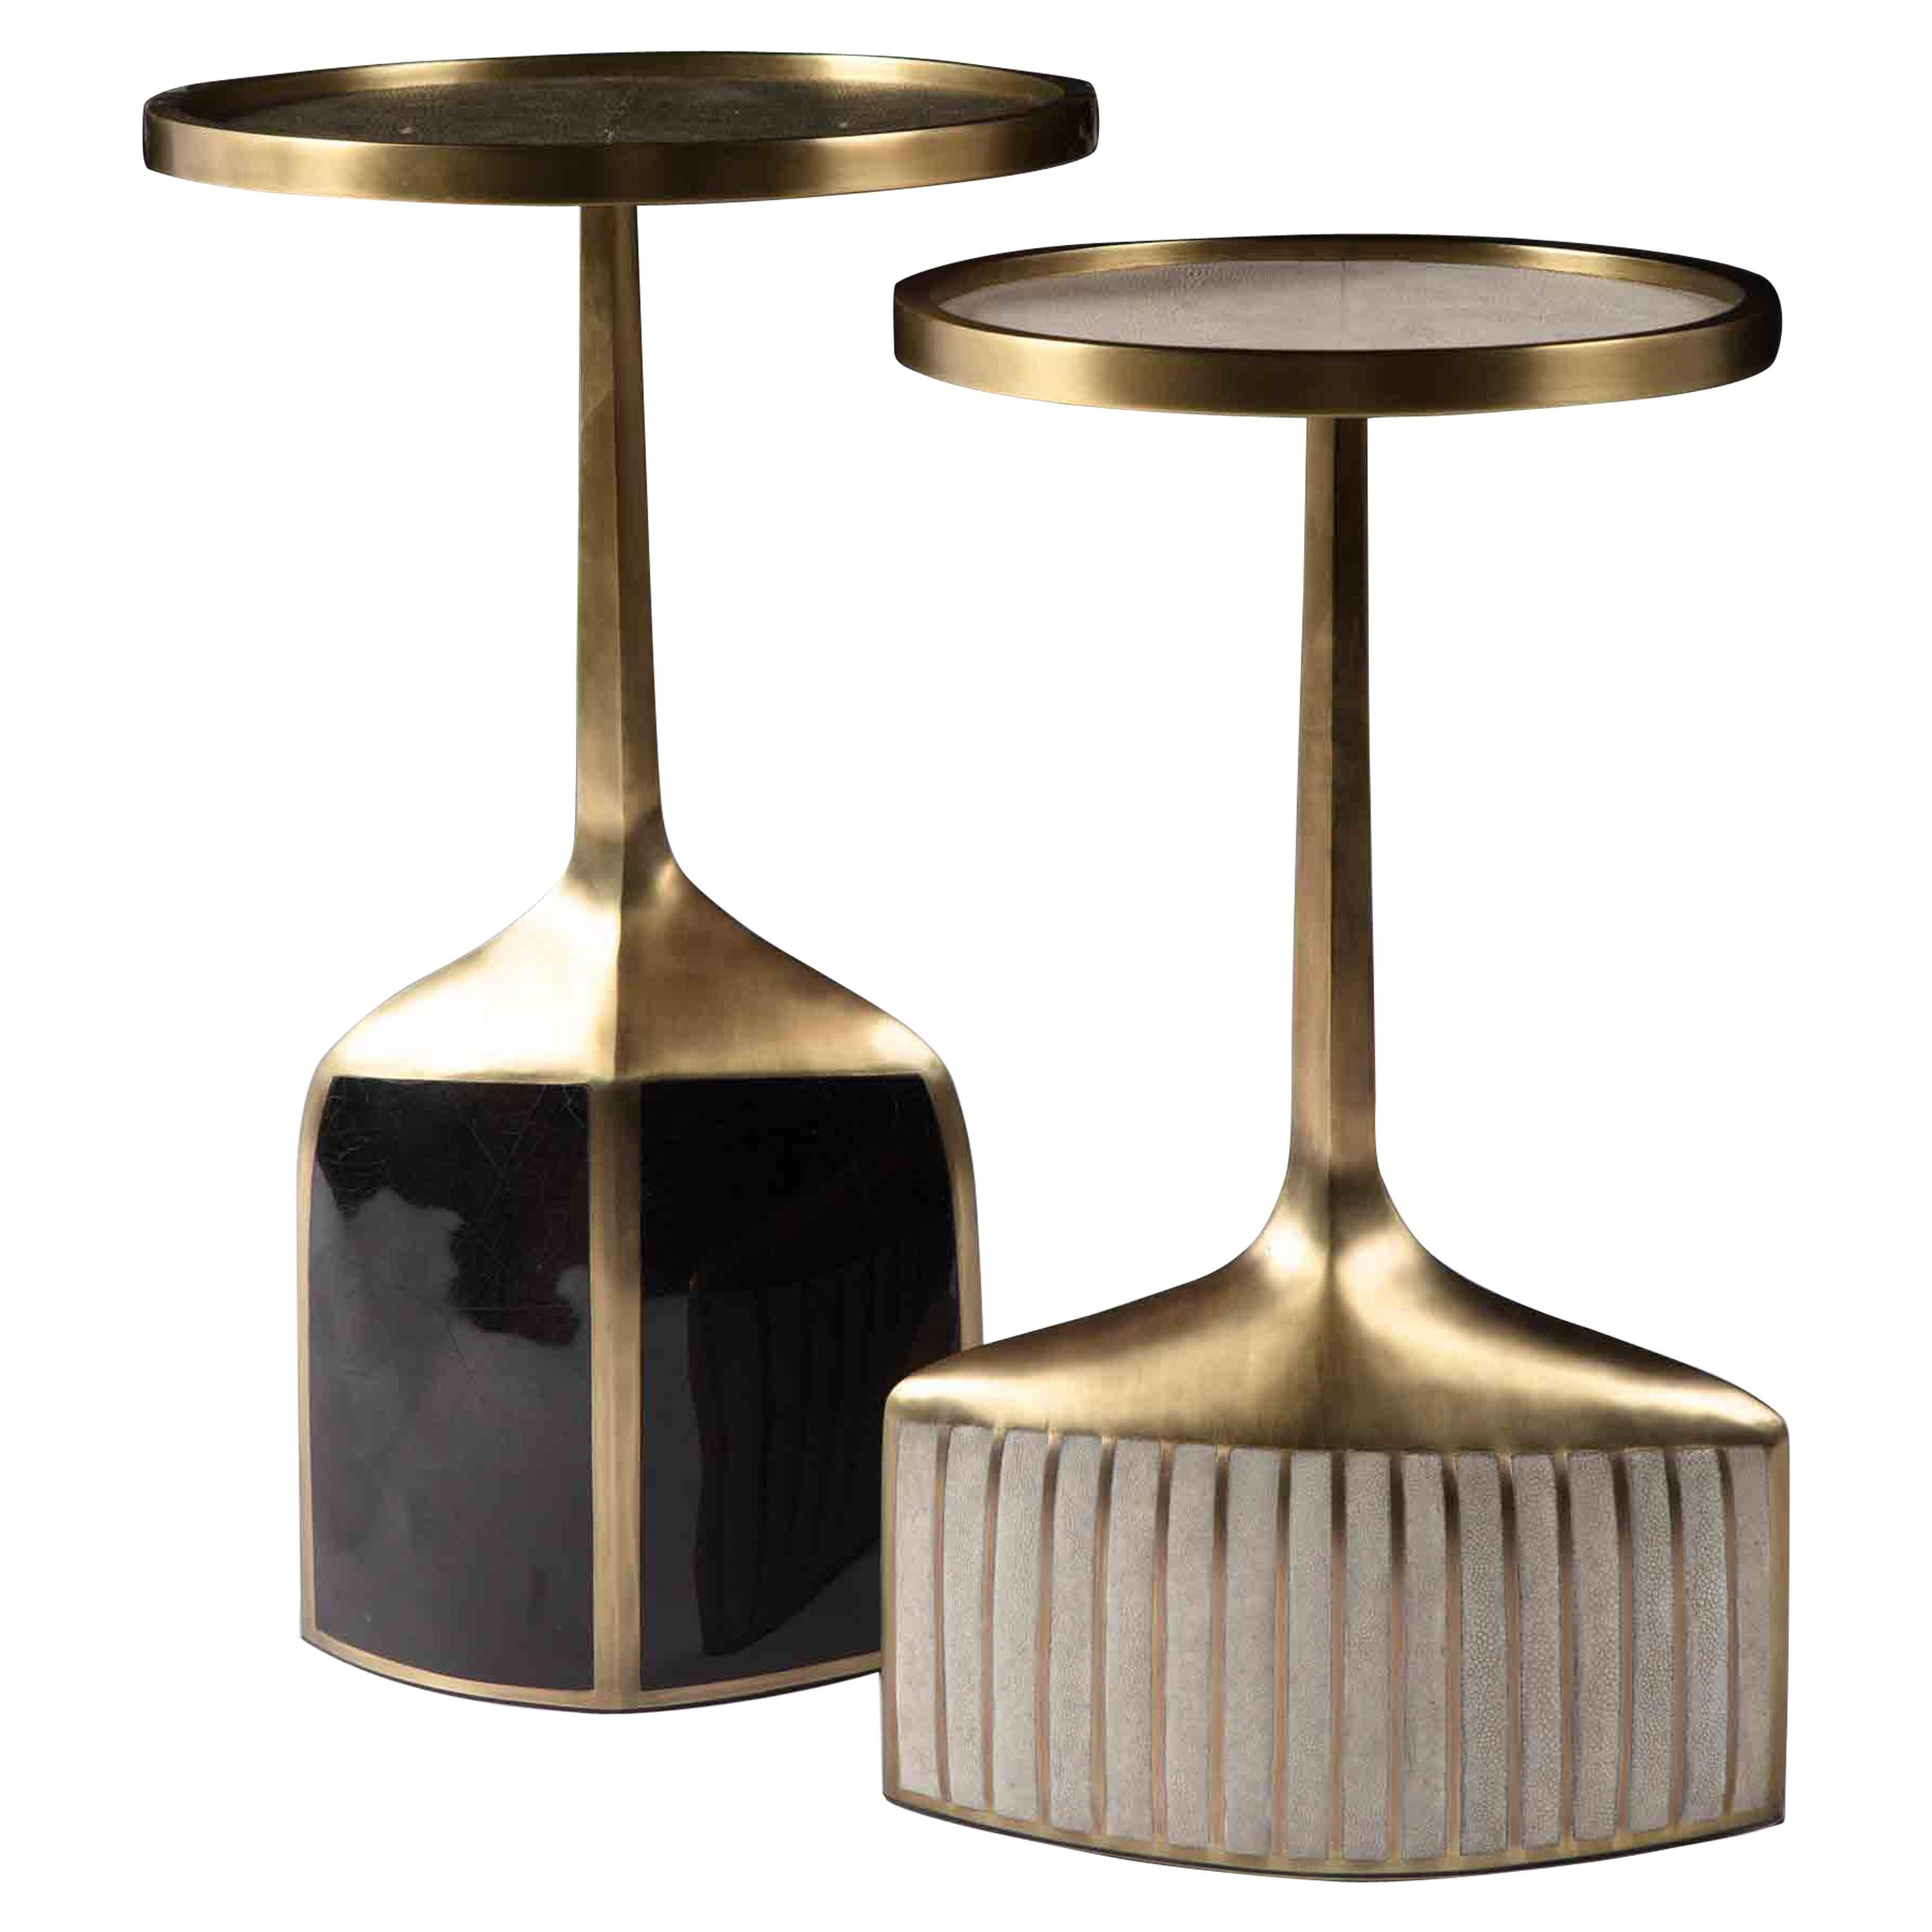 Set of 2 Pedestal Tables in Shagreen, Shell, and Brass by R&Y Augousti